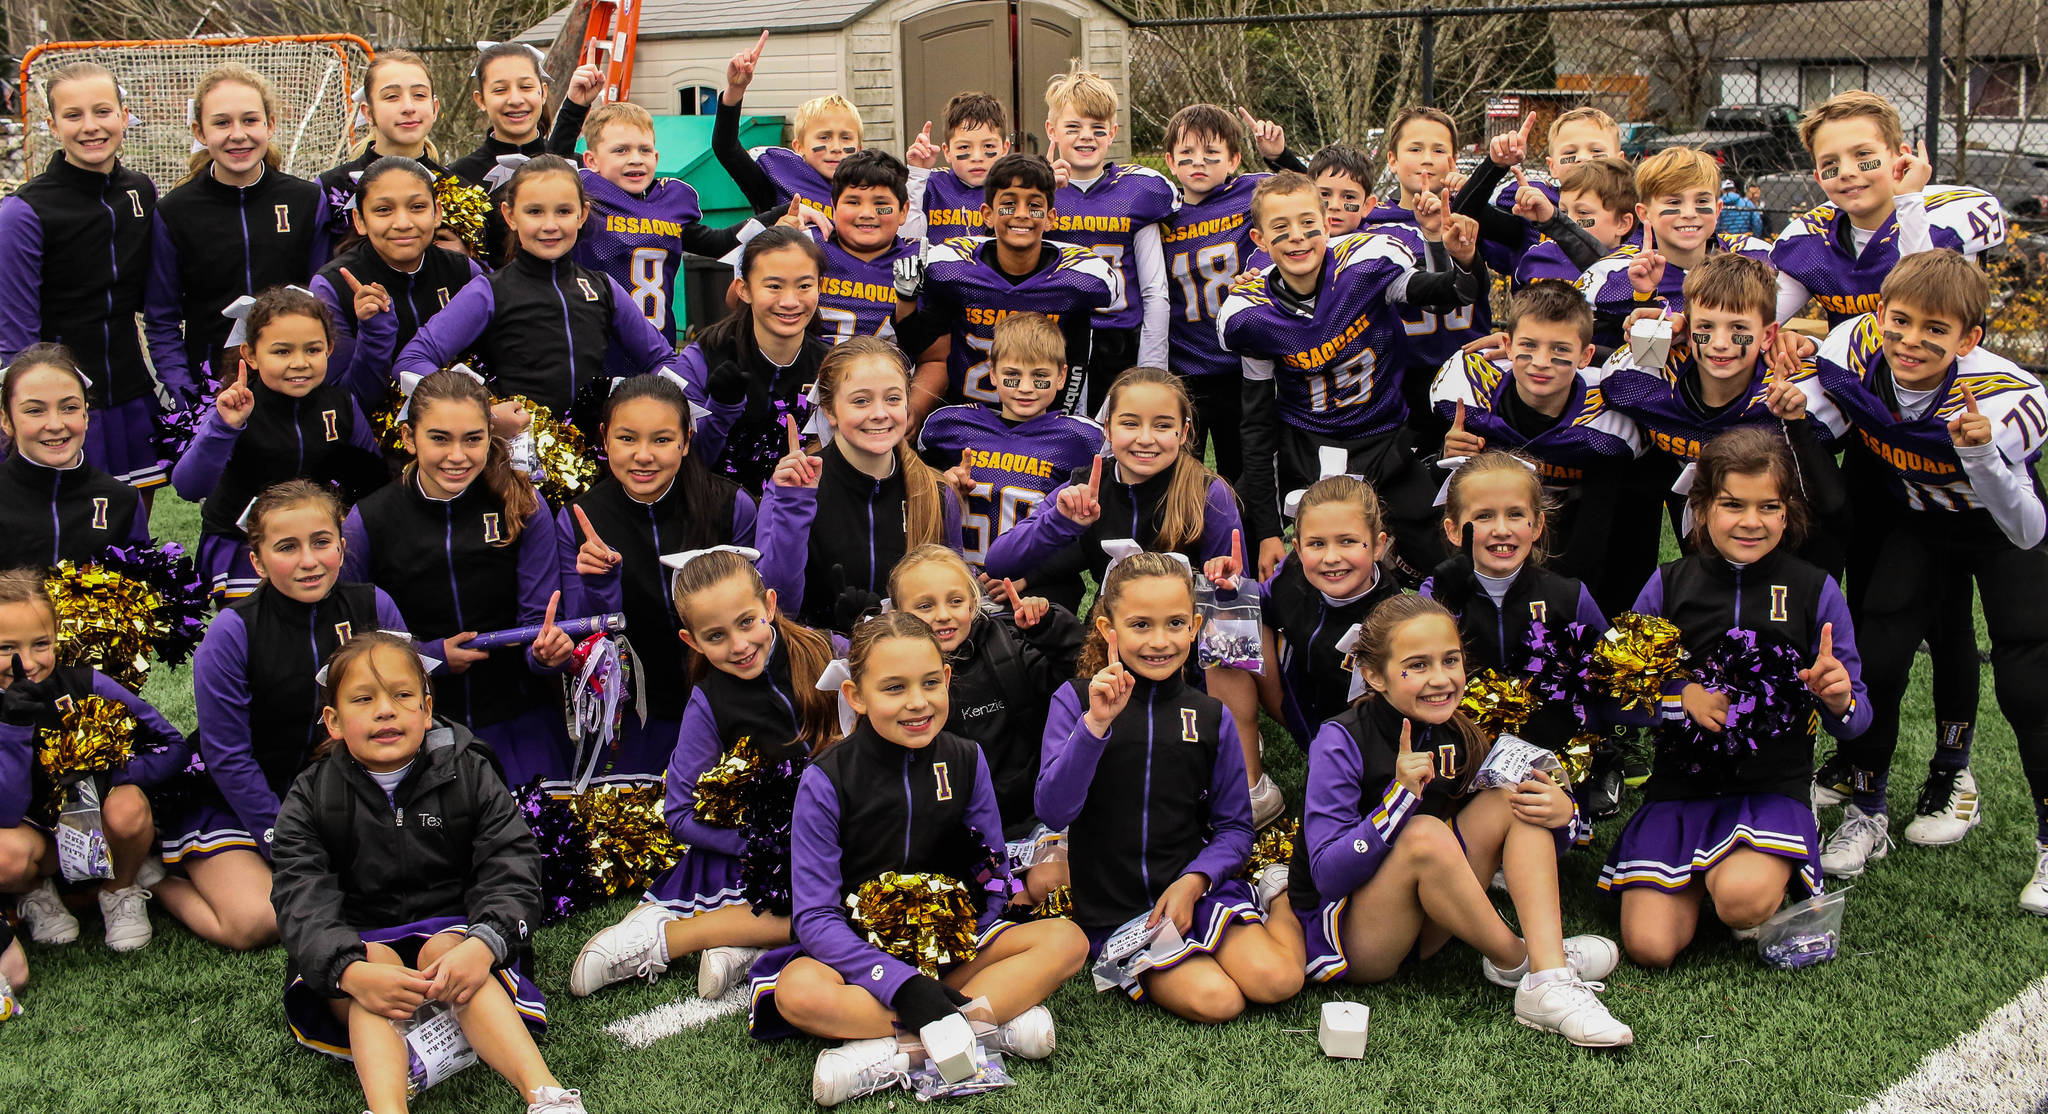 The Issaquah Rookie youth football team celebrates its Greater Eastside Junior Football Association championship along with the cheerleaders. Photo courtesy of Tricia Barry